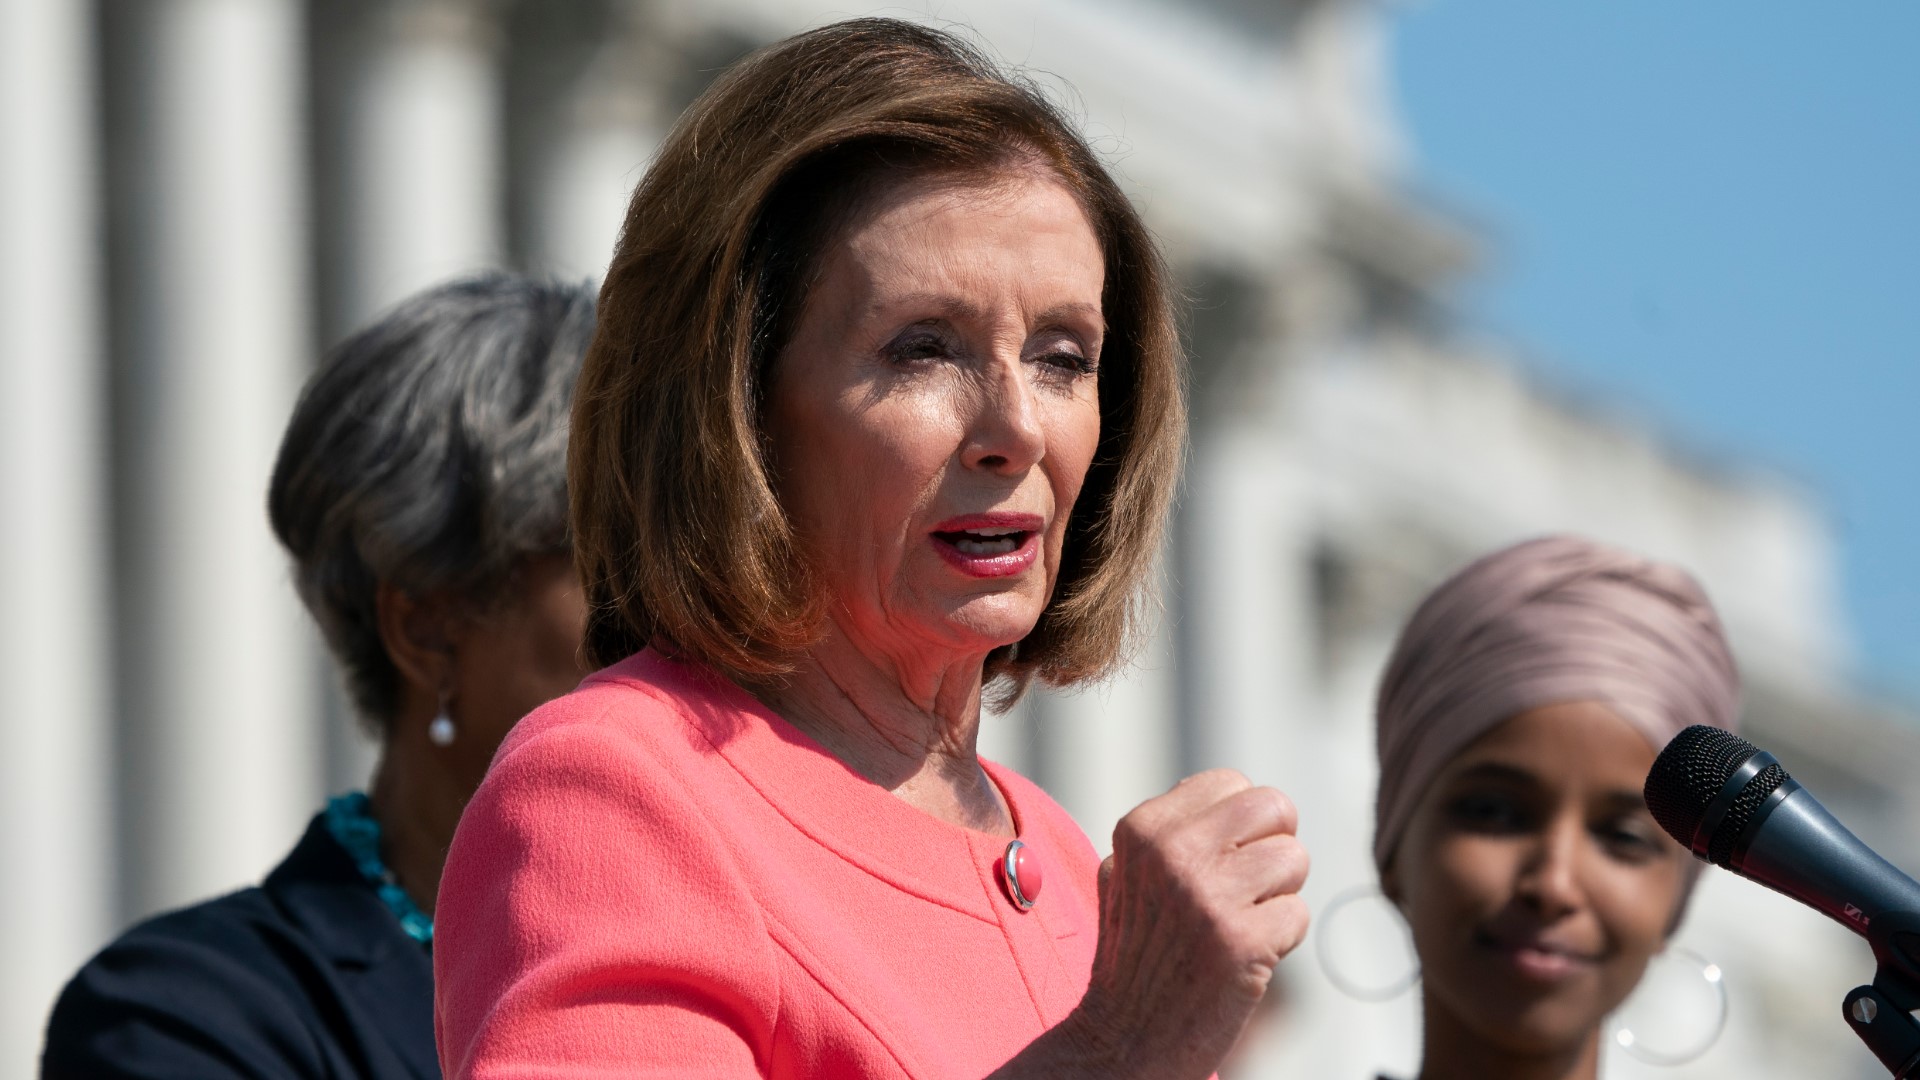 Did Nancy Pelosi divert funds from Social Security to help pay for impeachment hearings? We had our Verify do a deep dive to find out.